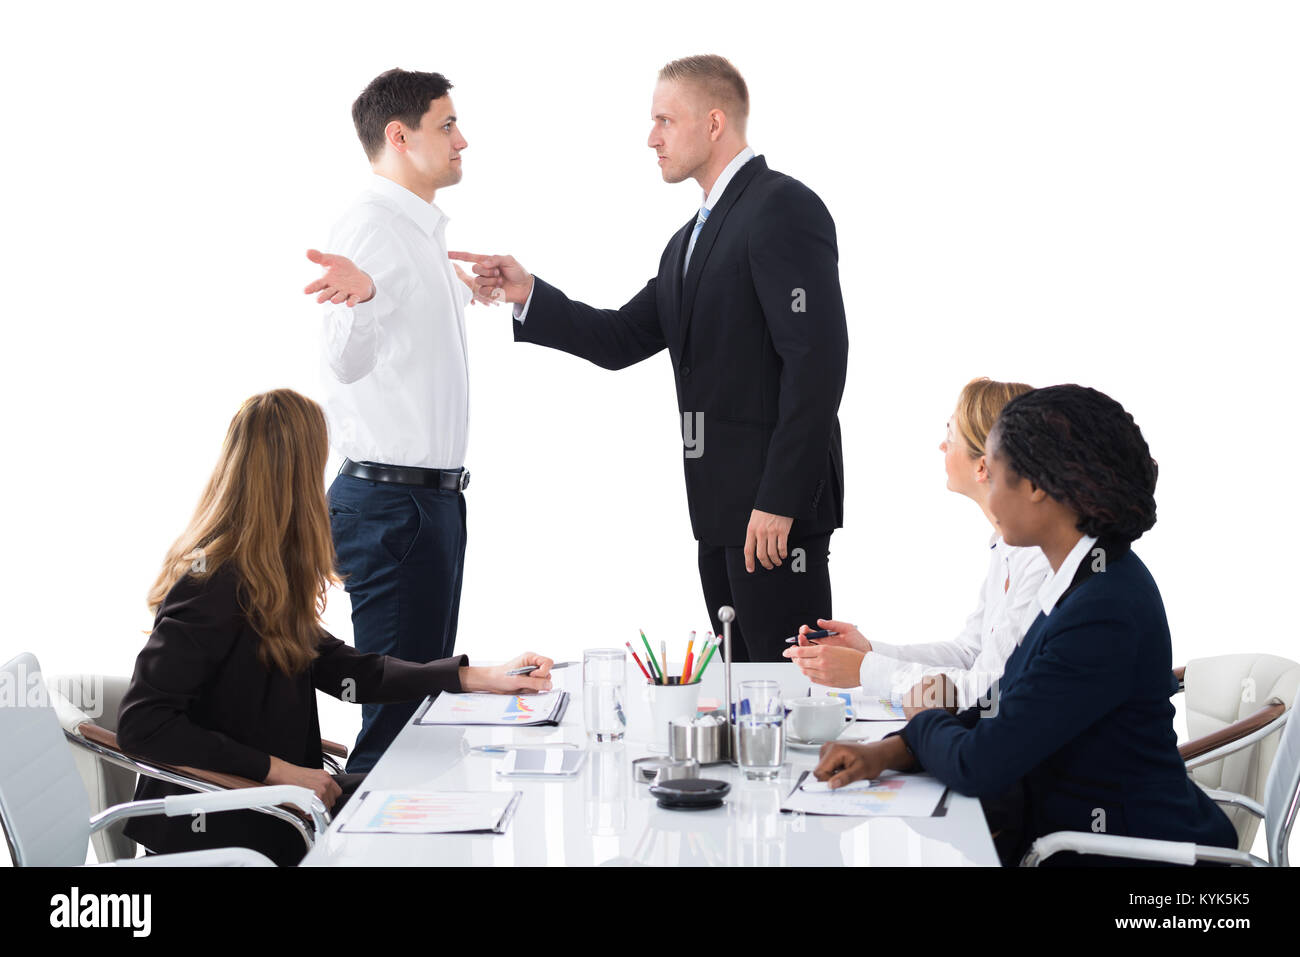 Boss Shouting On Male Executive In Business Meeting Stock Photo